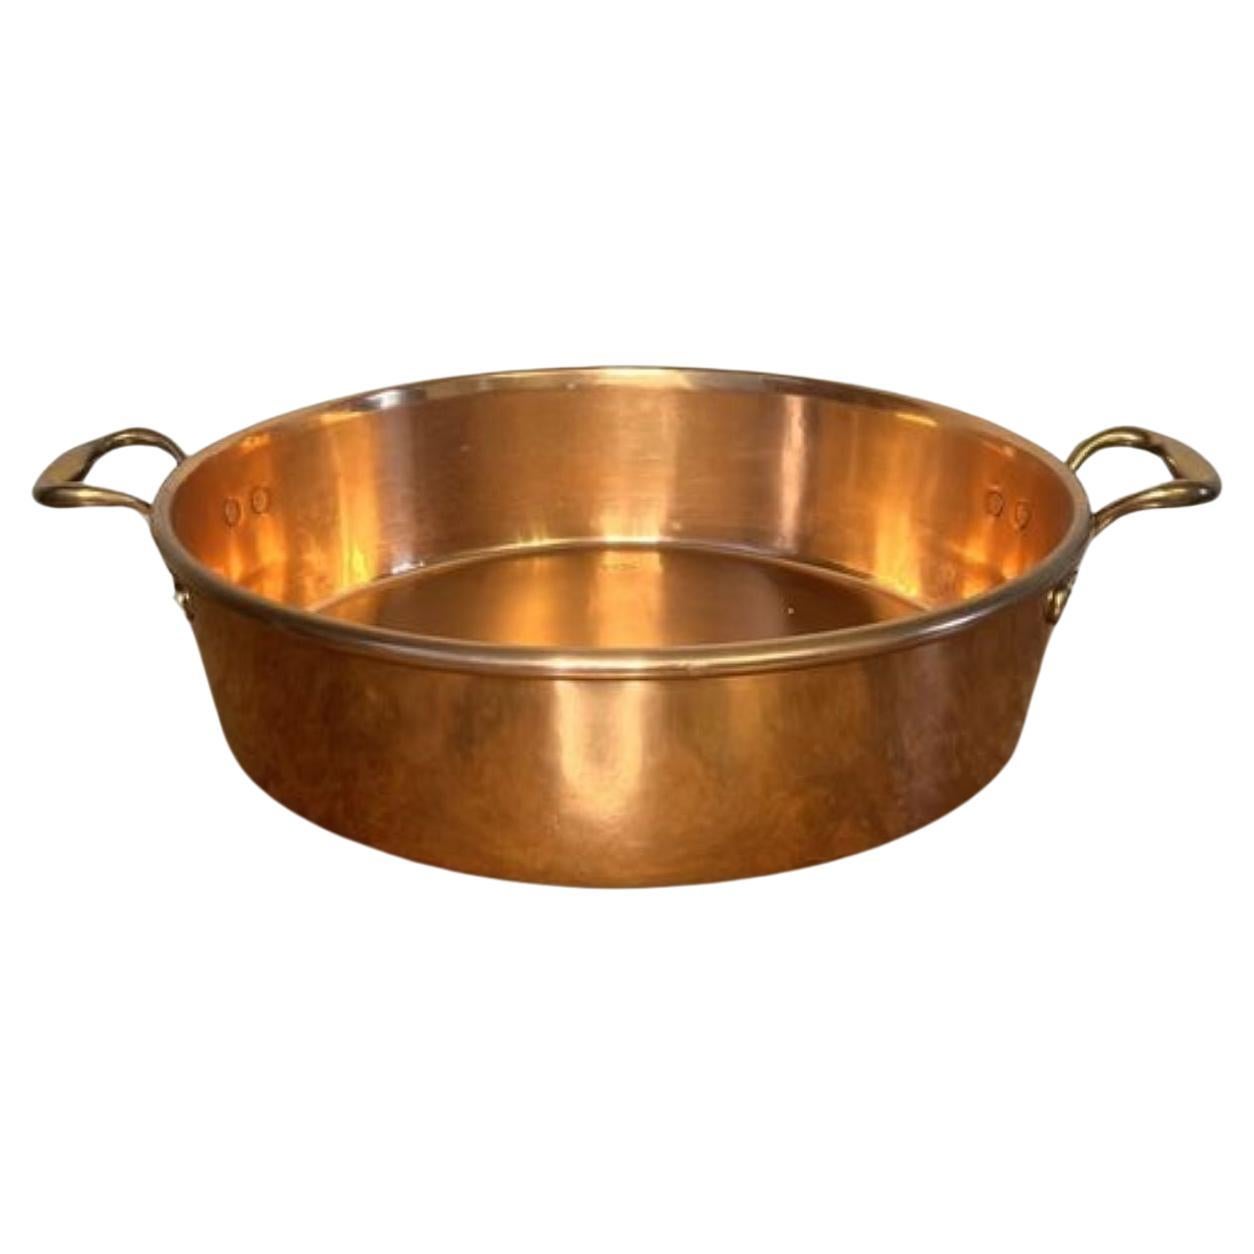 Large quality antique George III copper pan For Sale